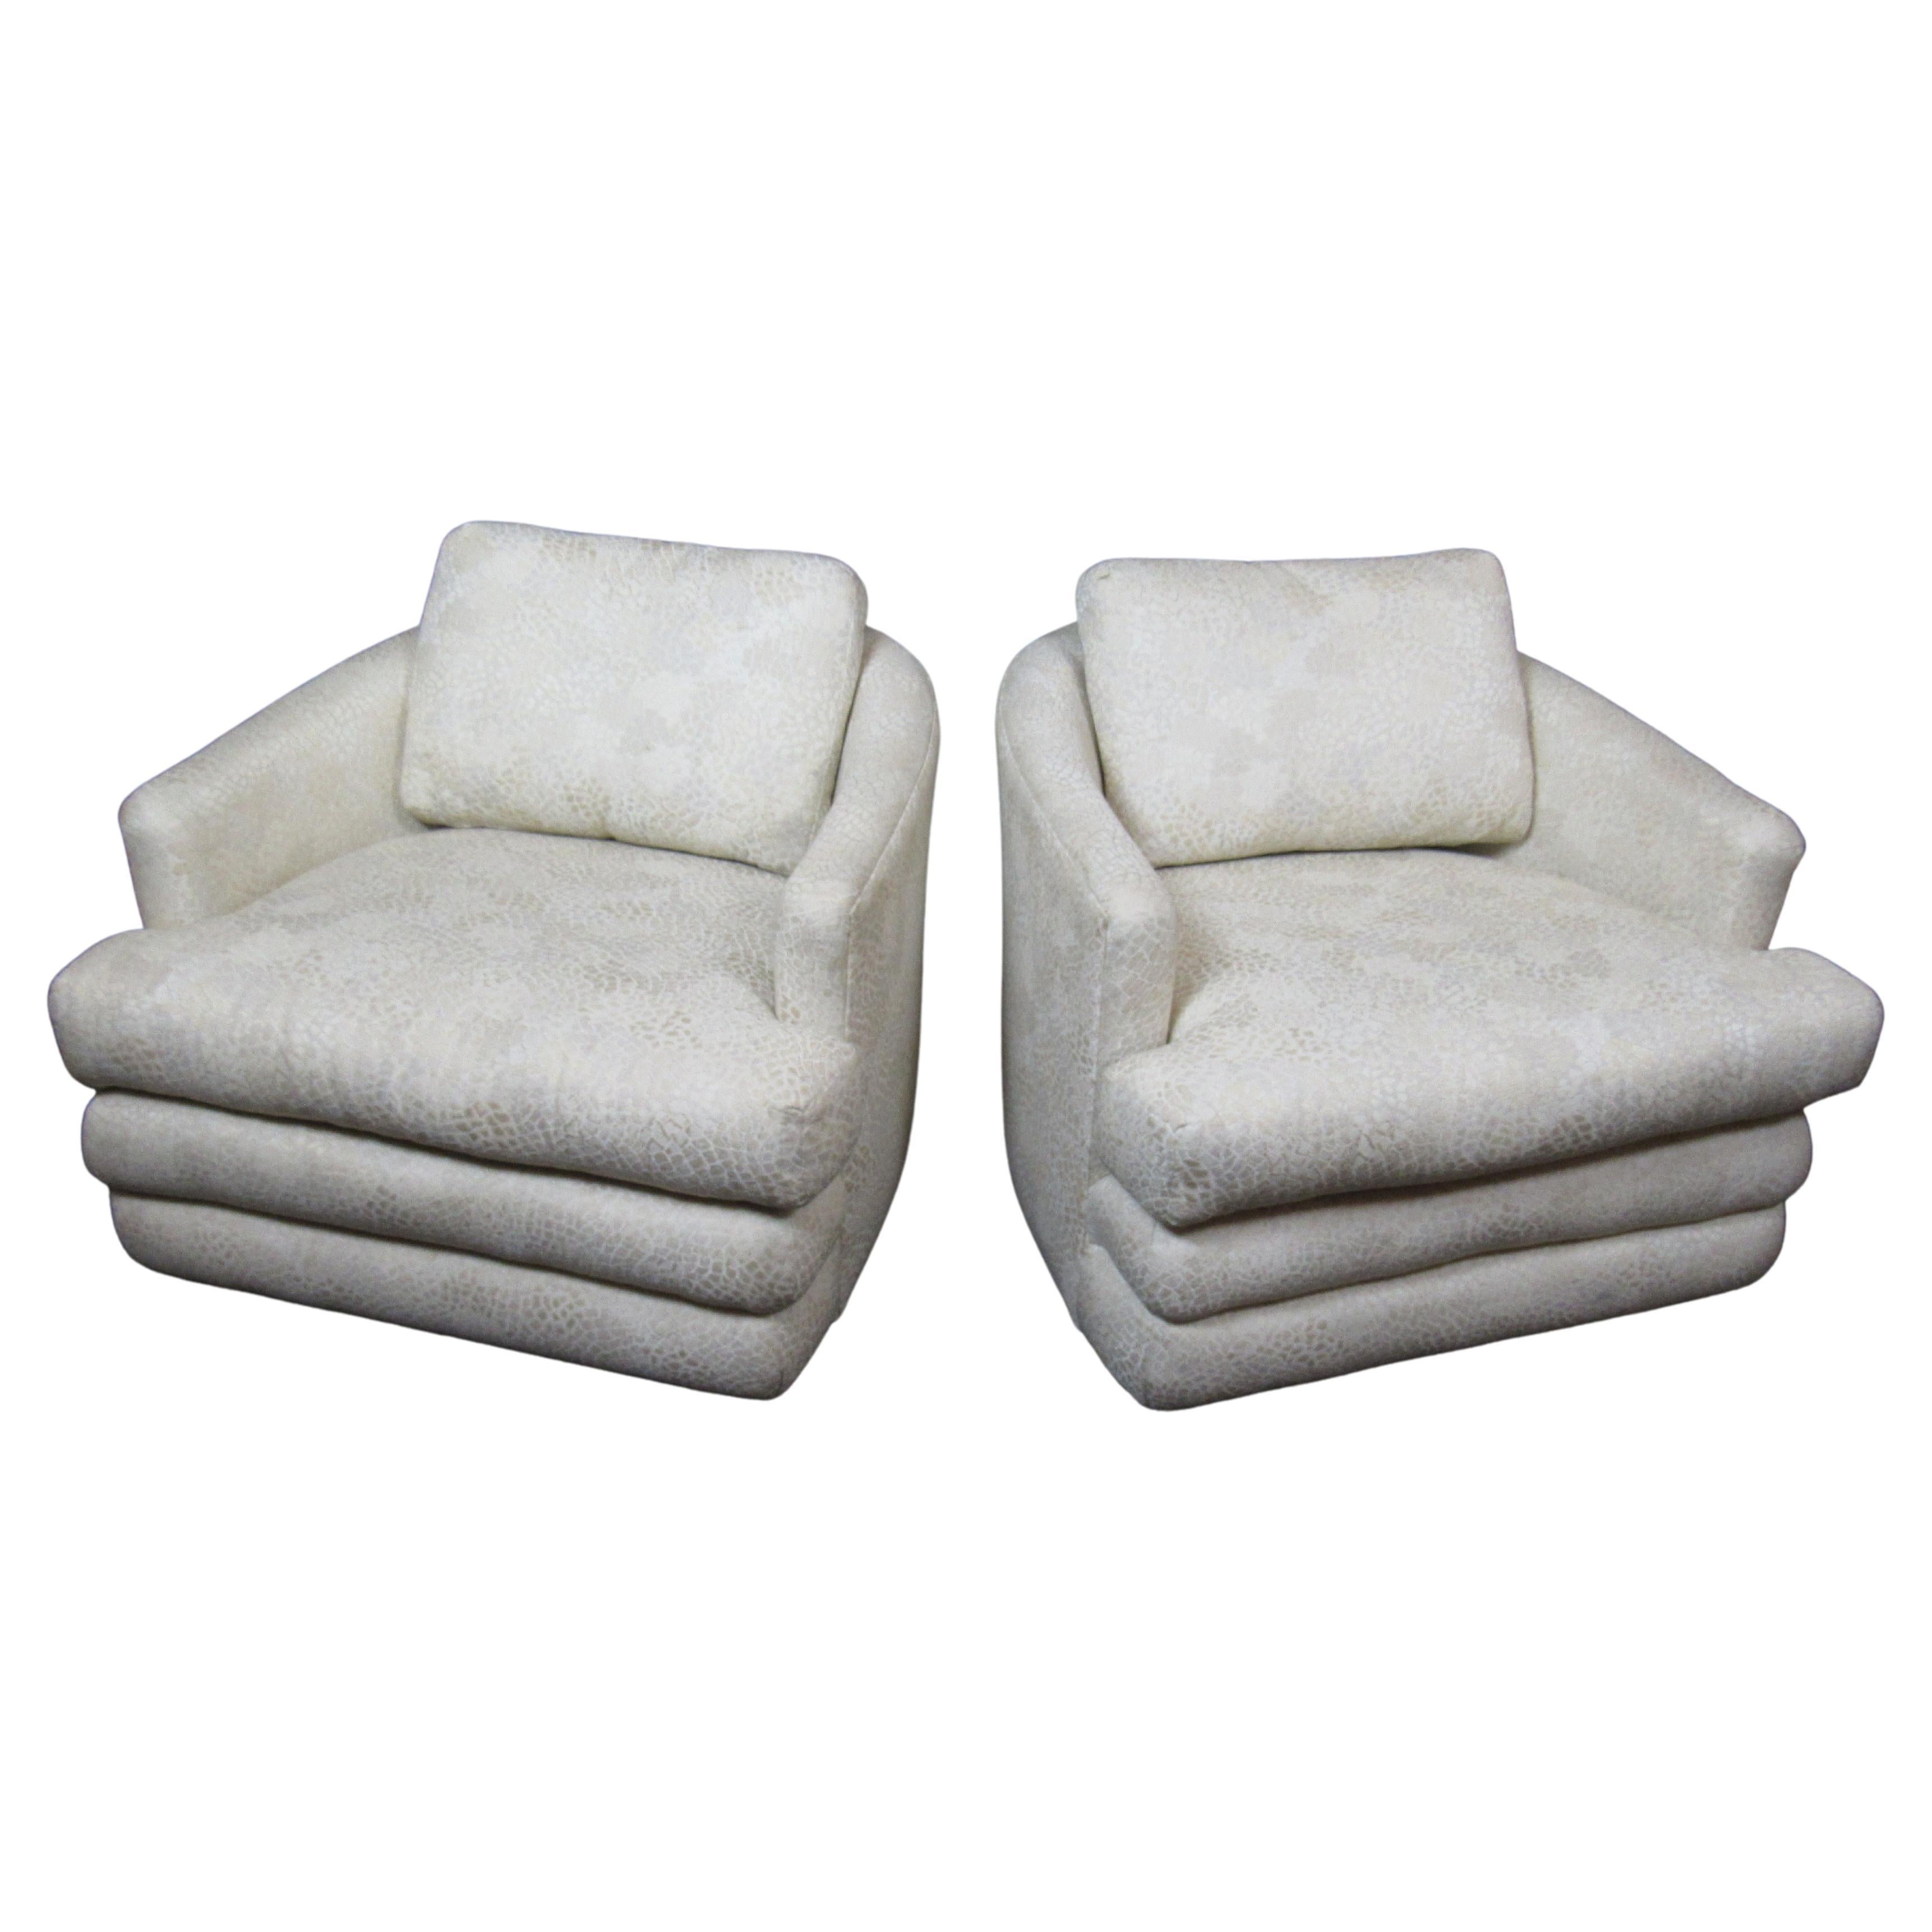 Pair of Mid-Century White Lounge Chairs For Sale